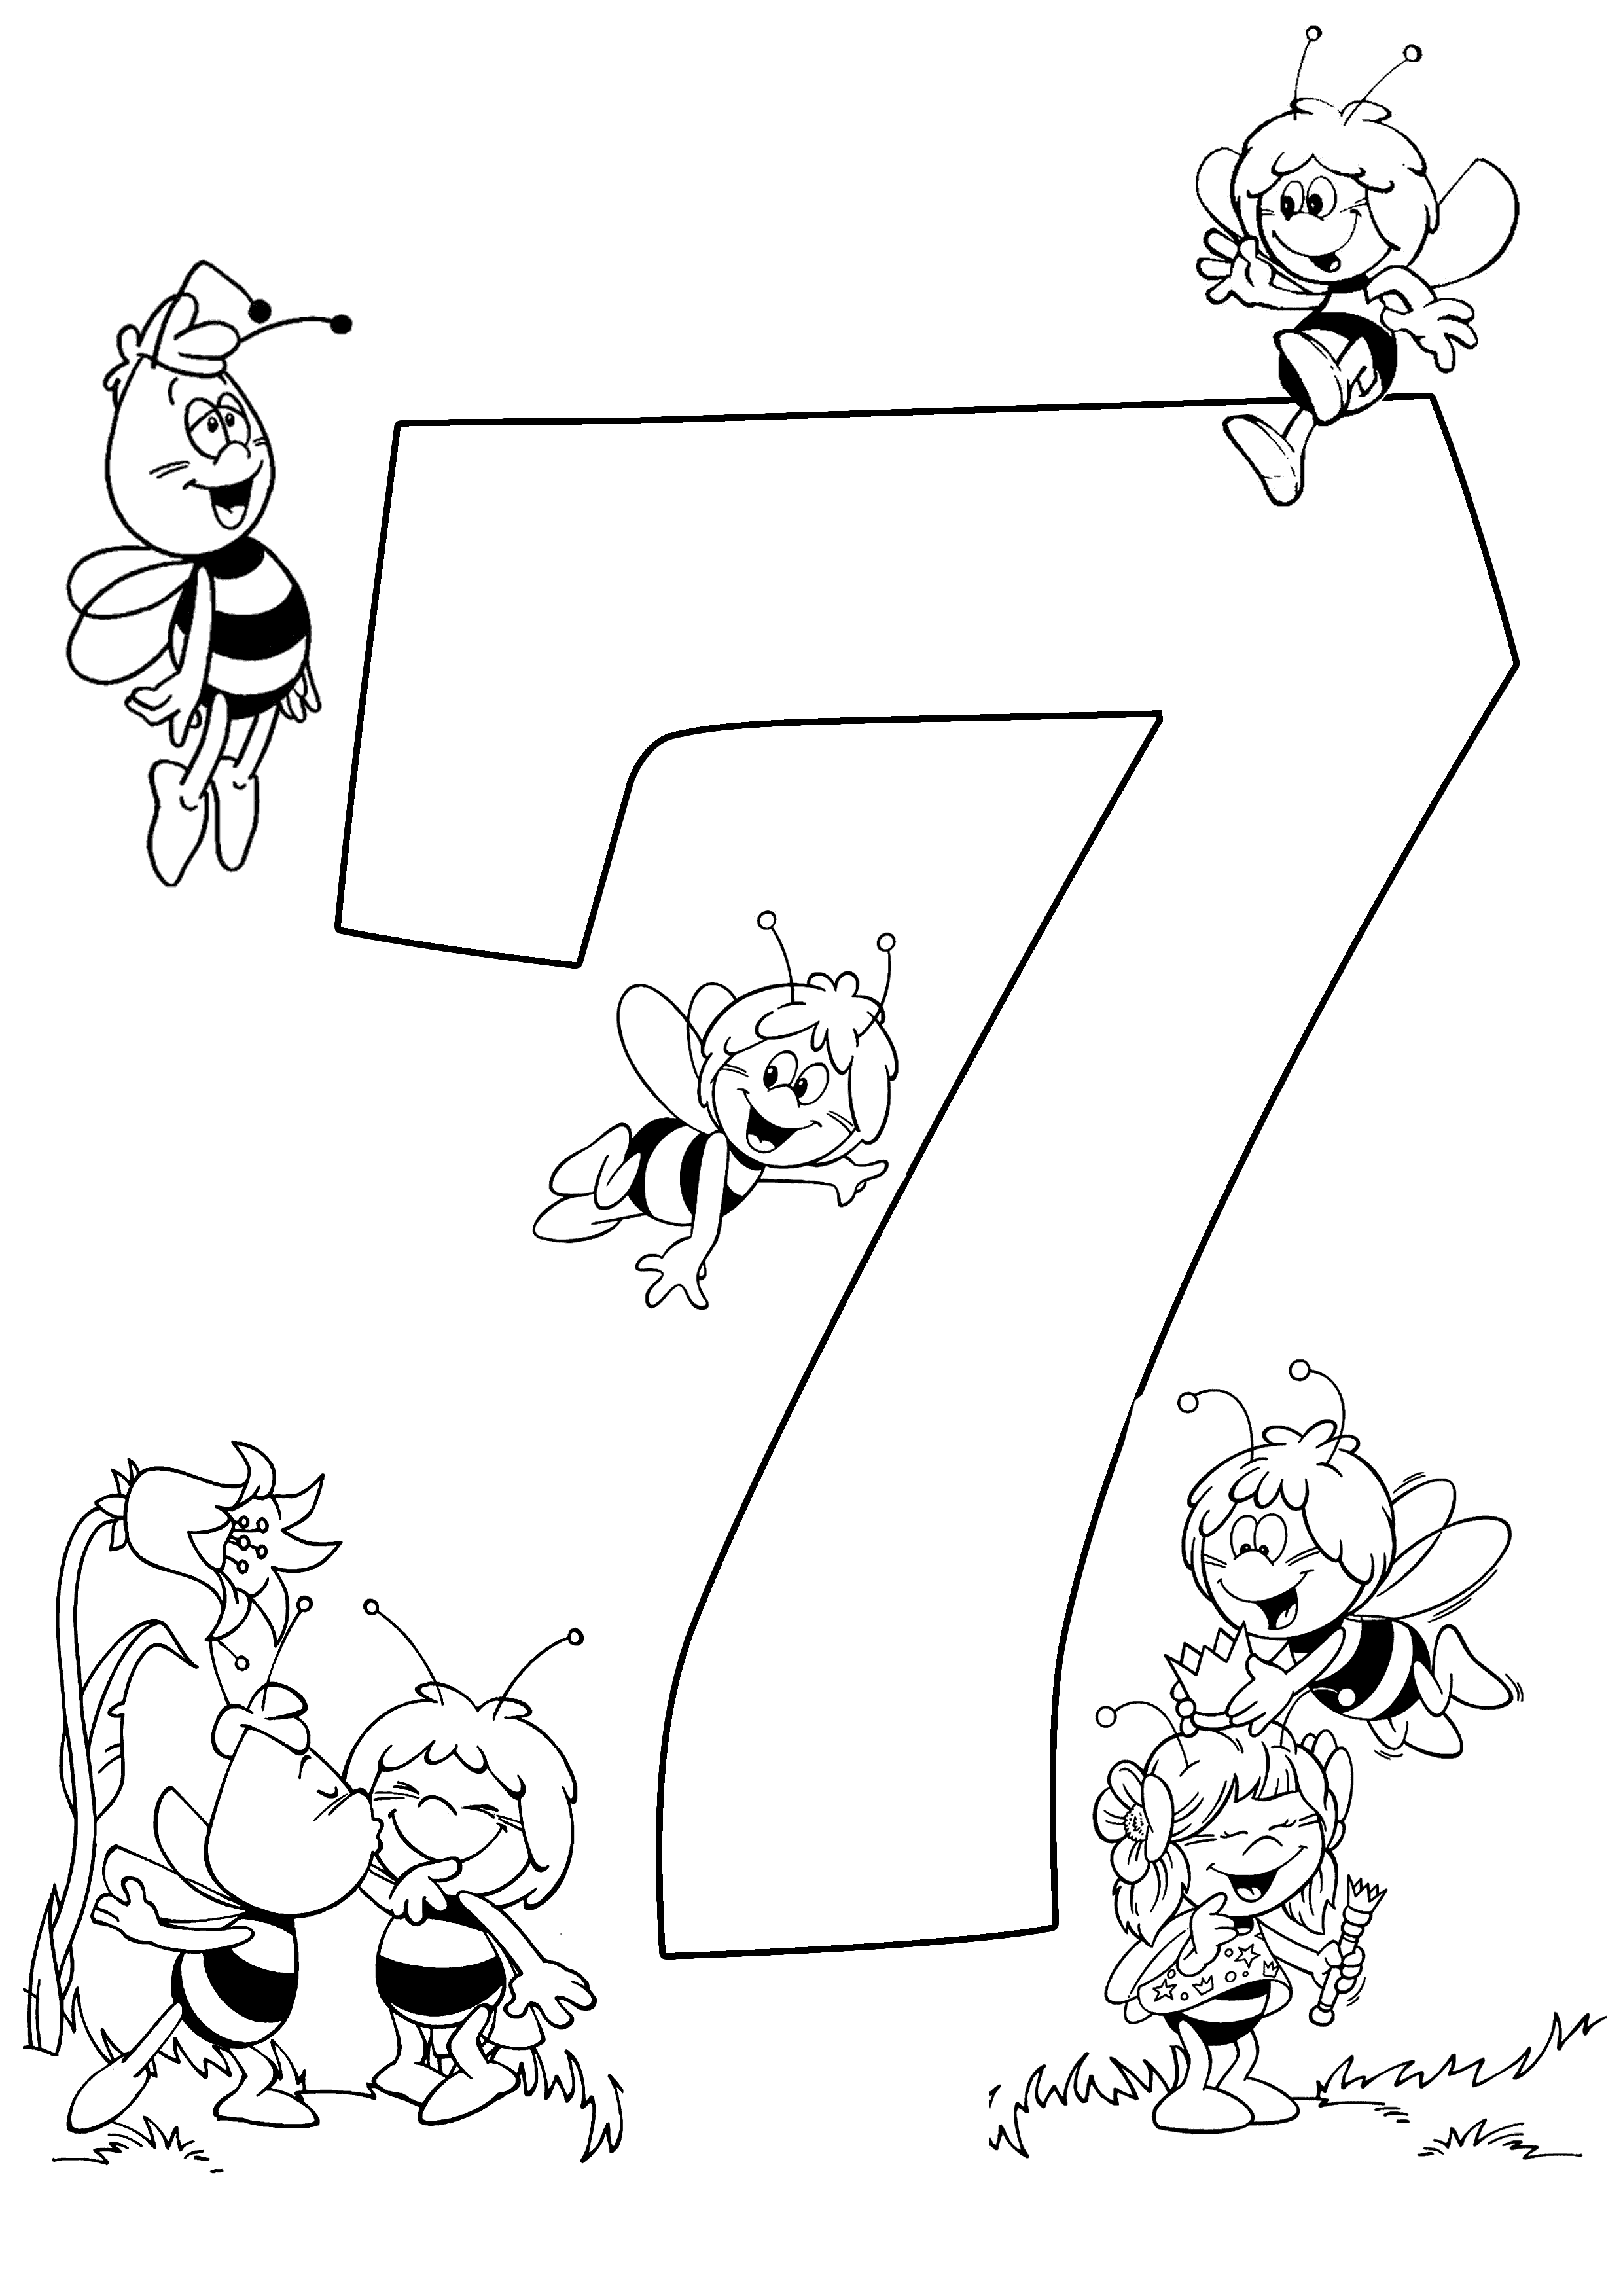 free-printable-numbers-coloring-pages